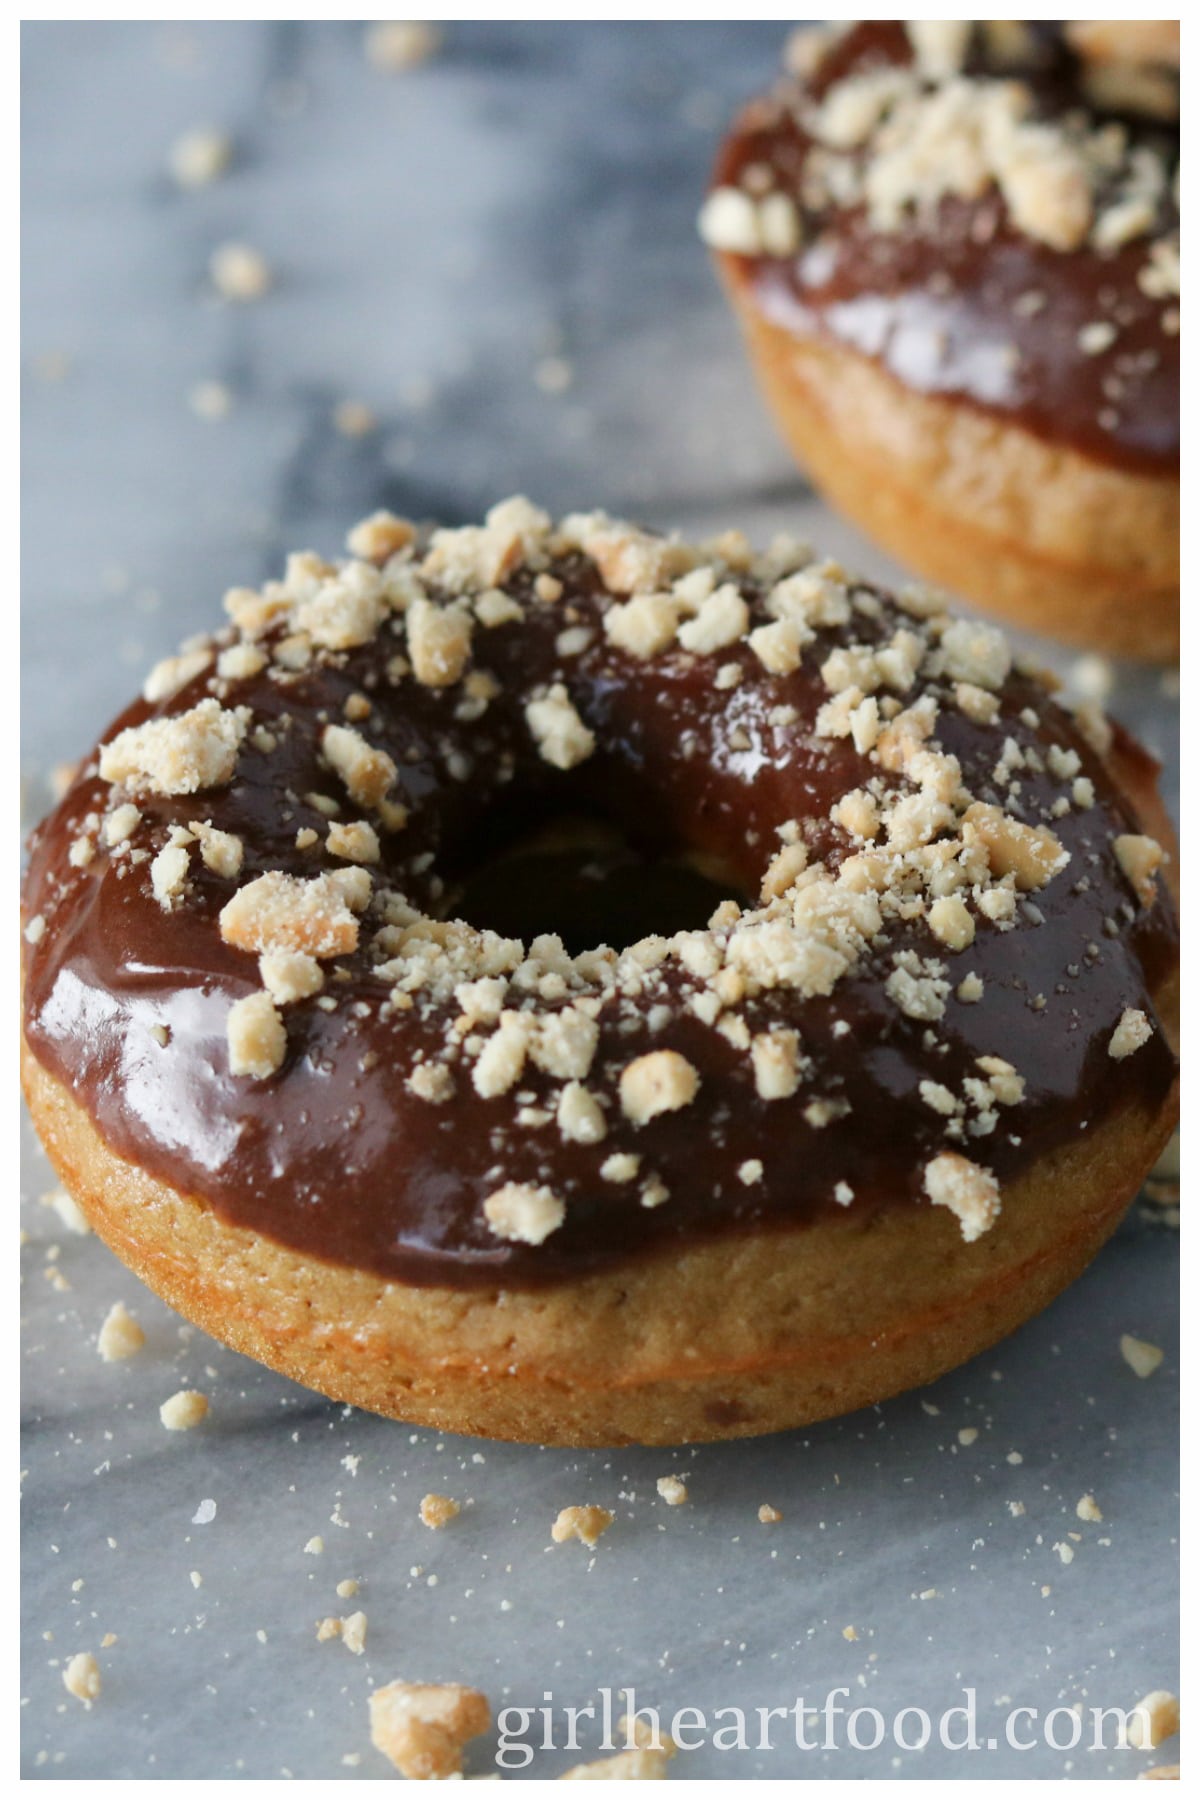 Close-up of a glazed baked donut with crushed peanuts.